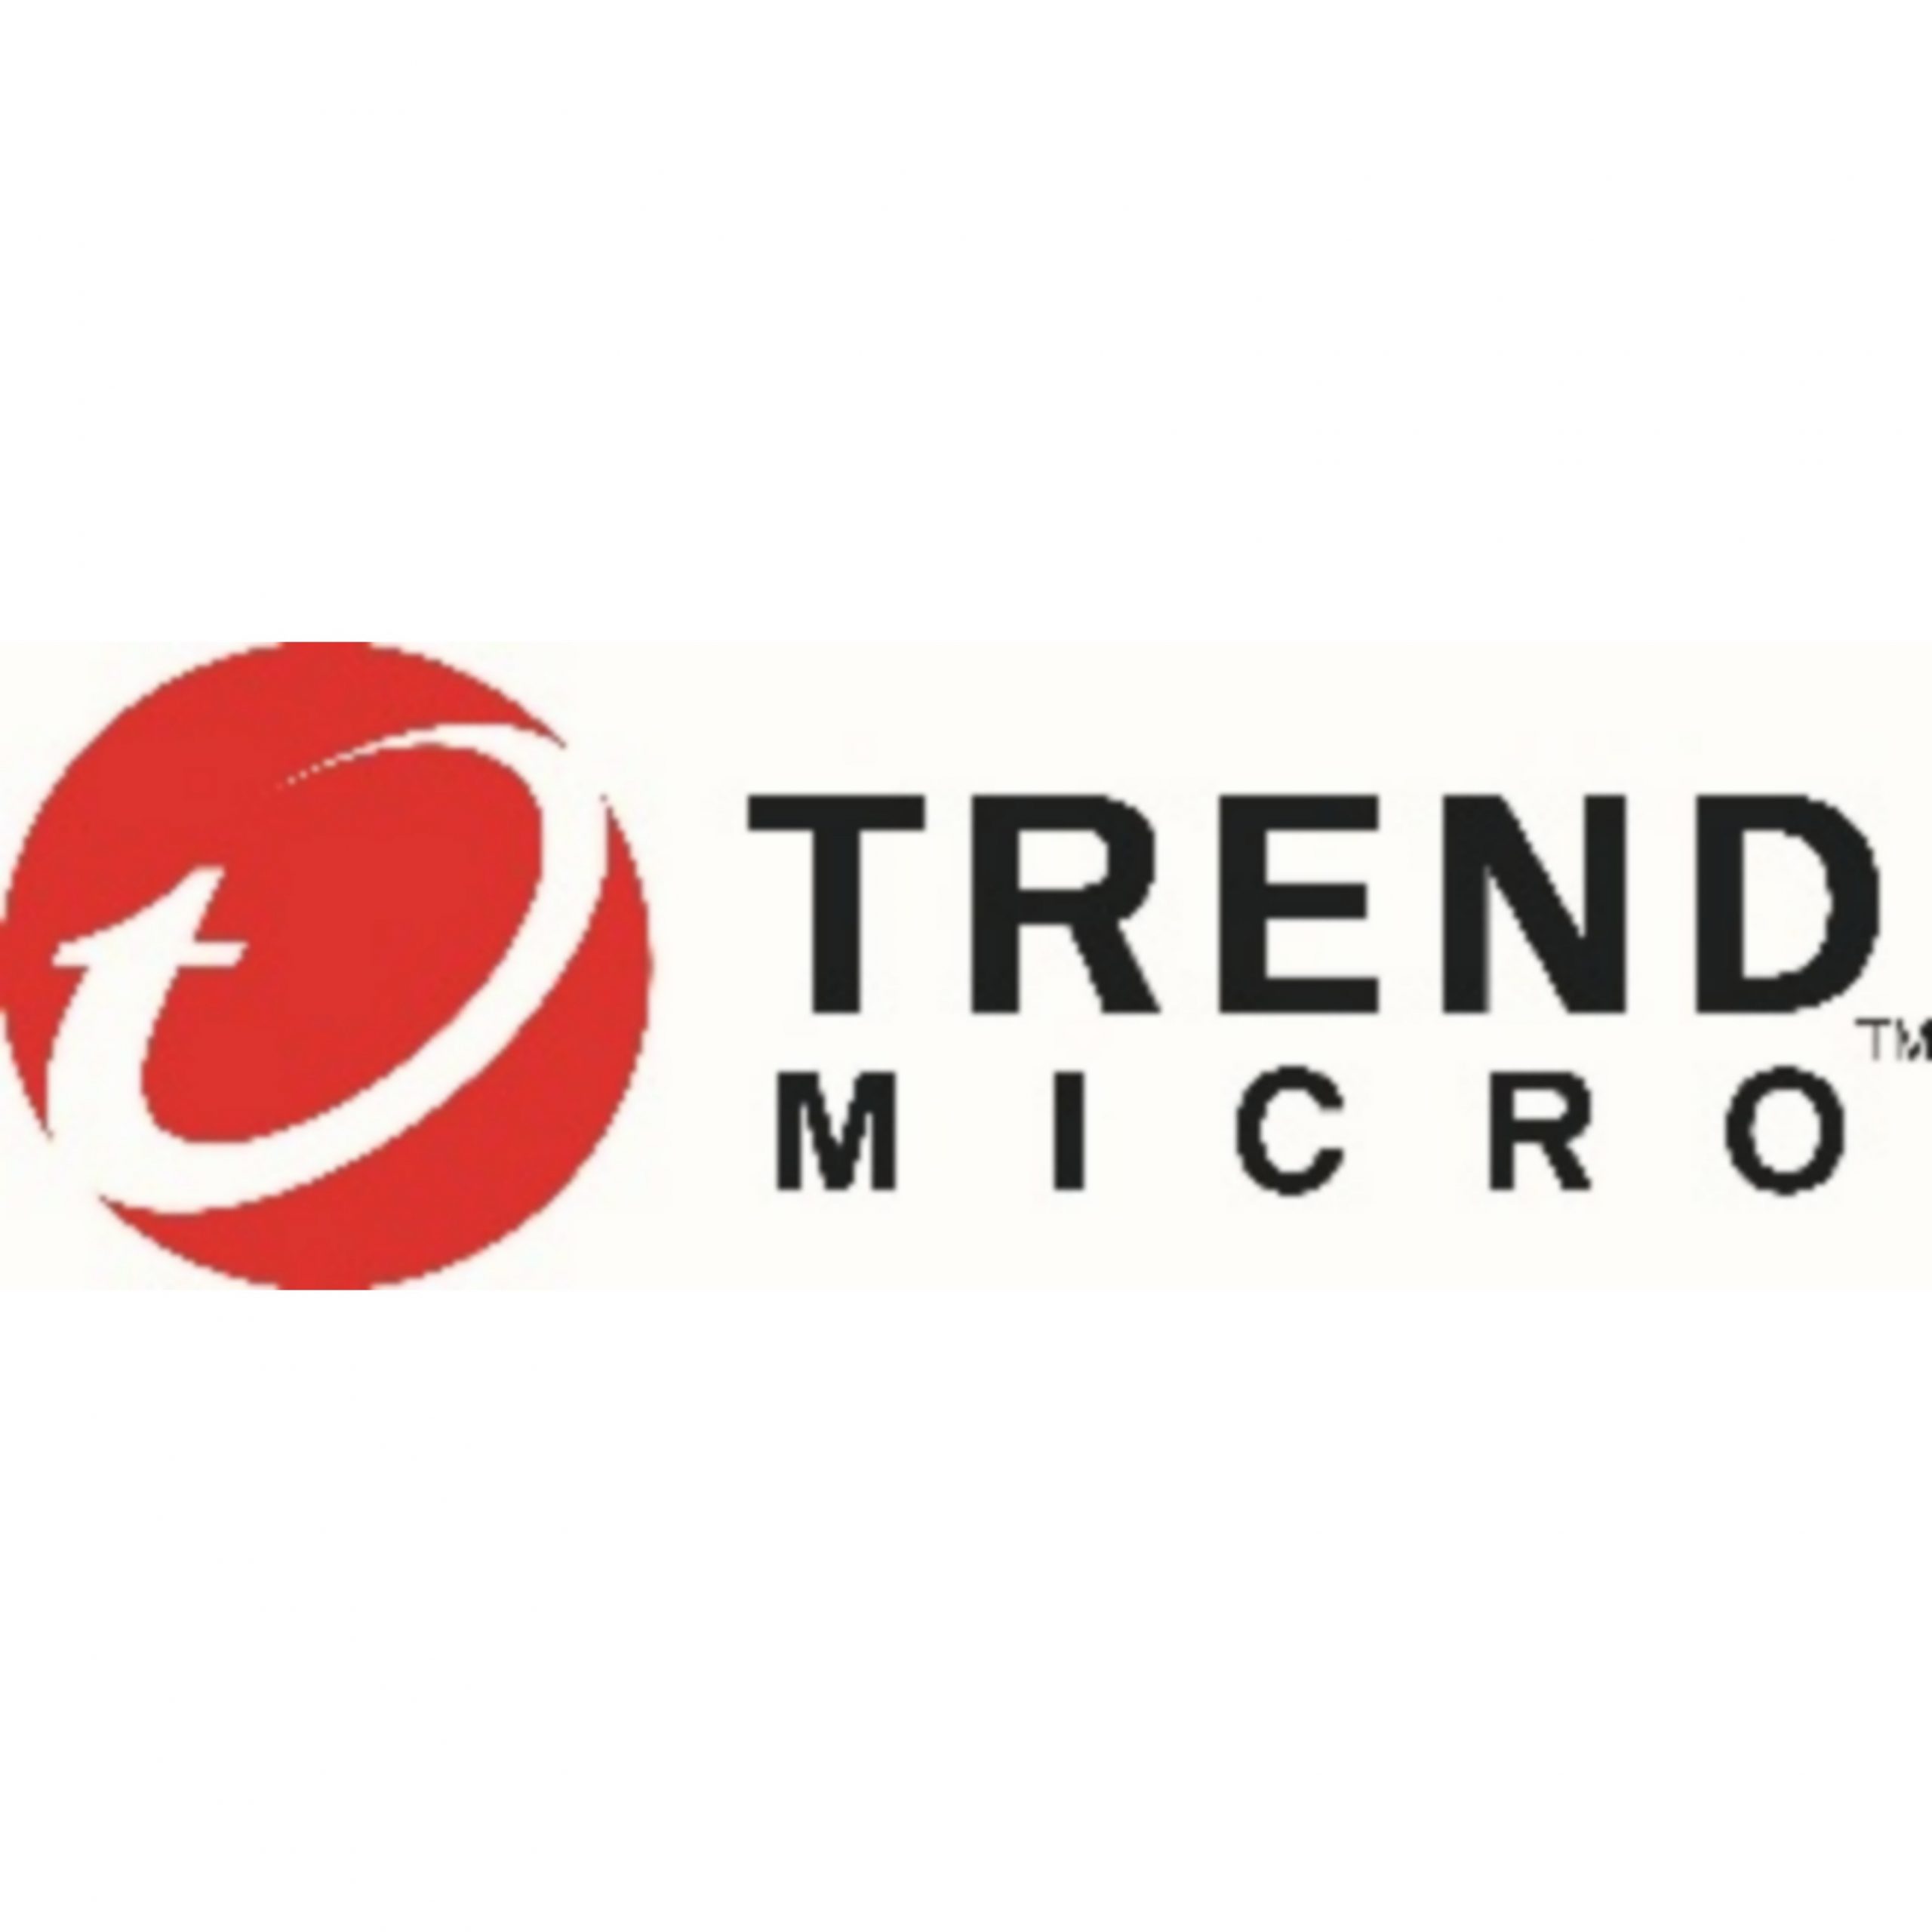 Trend Micro Unites Industry With Most Powerful and Complete Security Platform-thumnail